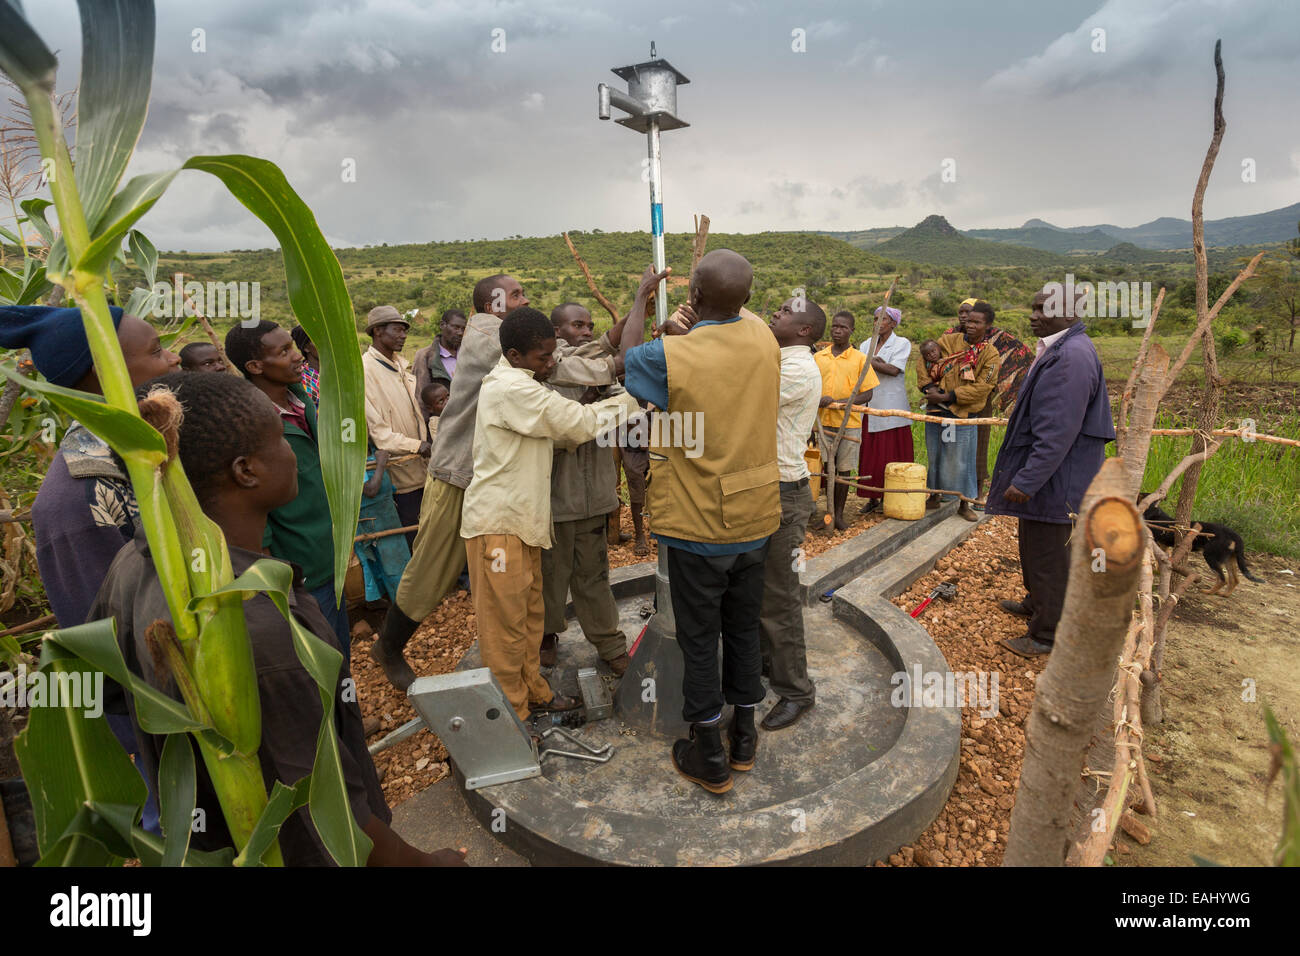 Community members in Sukuroi village, Bukwo District, Uganda work to construct a shallow well in their community. Stock Photo